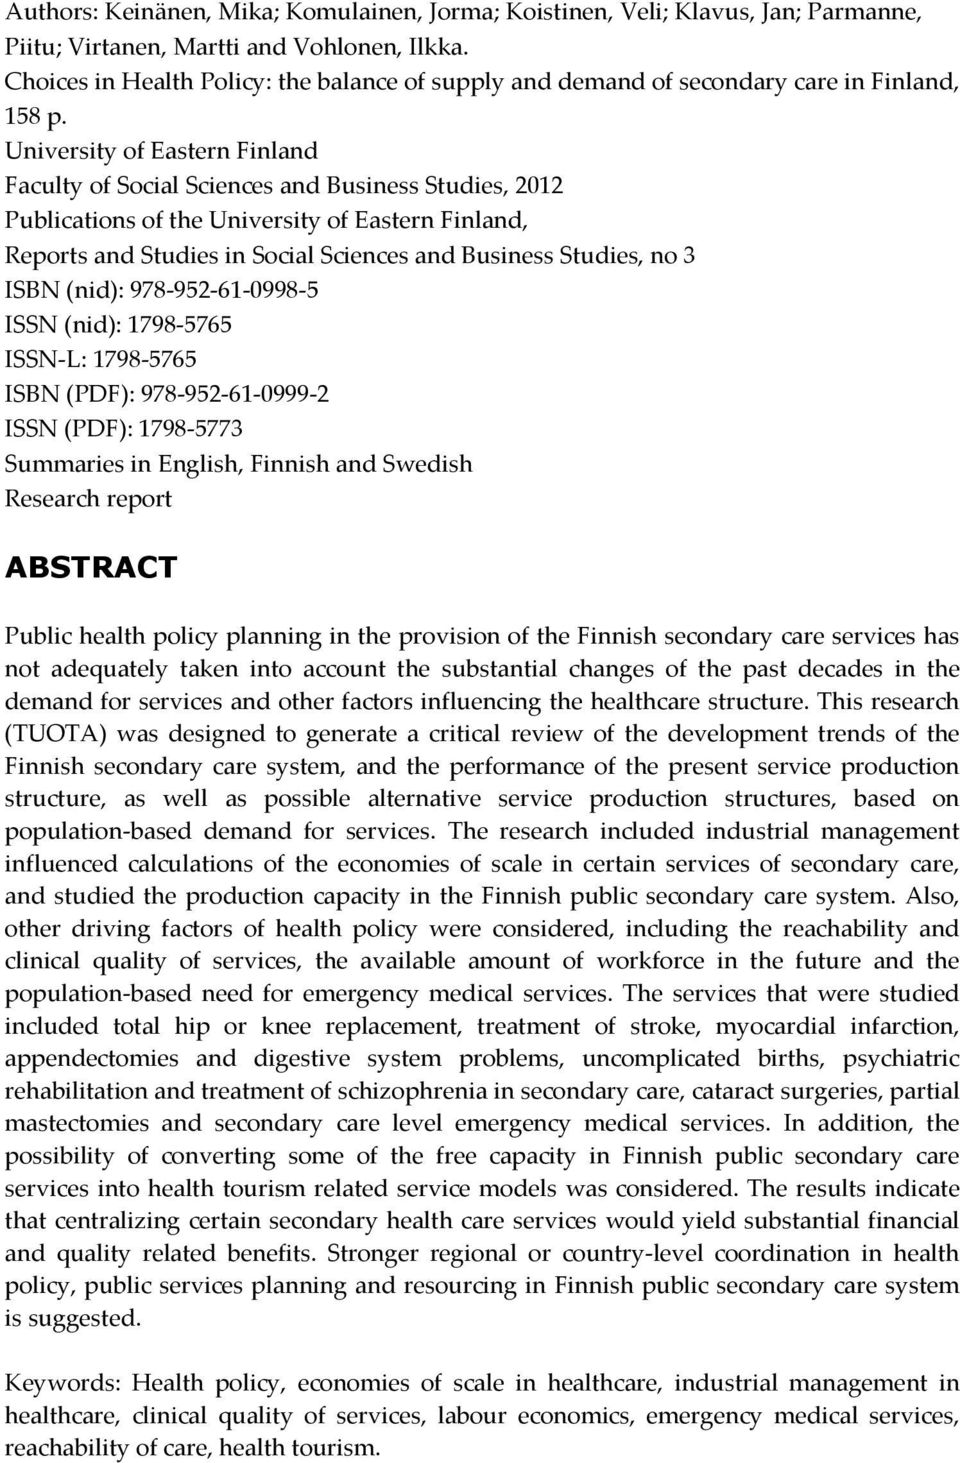 University of Eastern Finland Faculty of Social Sciences and Business Studies, 2012 Publications of the University of Eastern Finland, Reports and Studies in Social Sciences and Business Studies, no